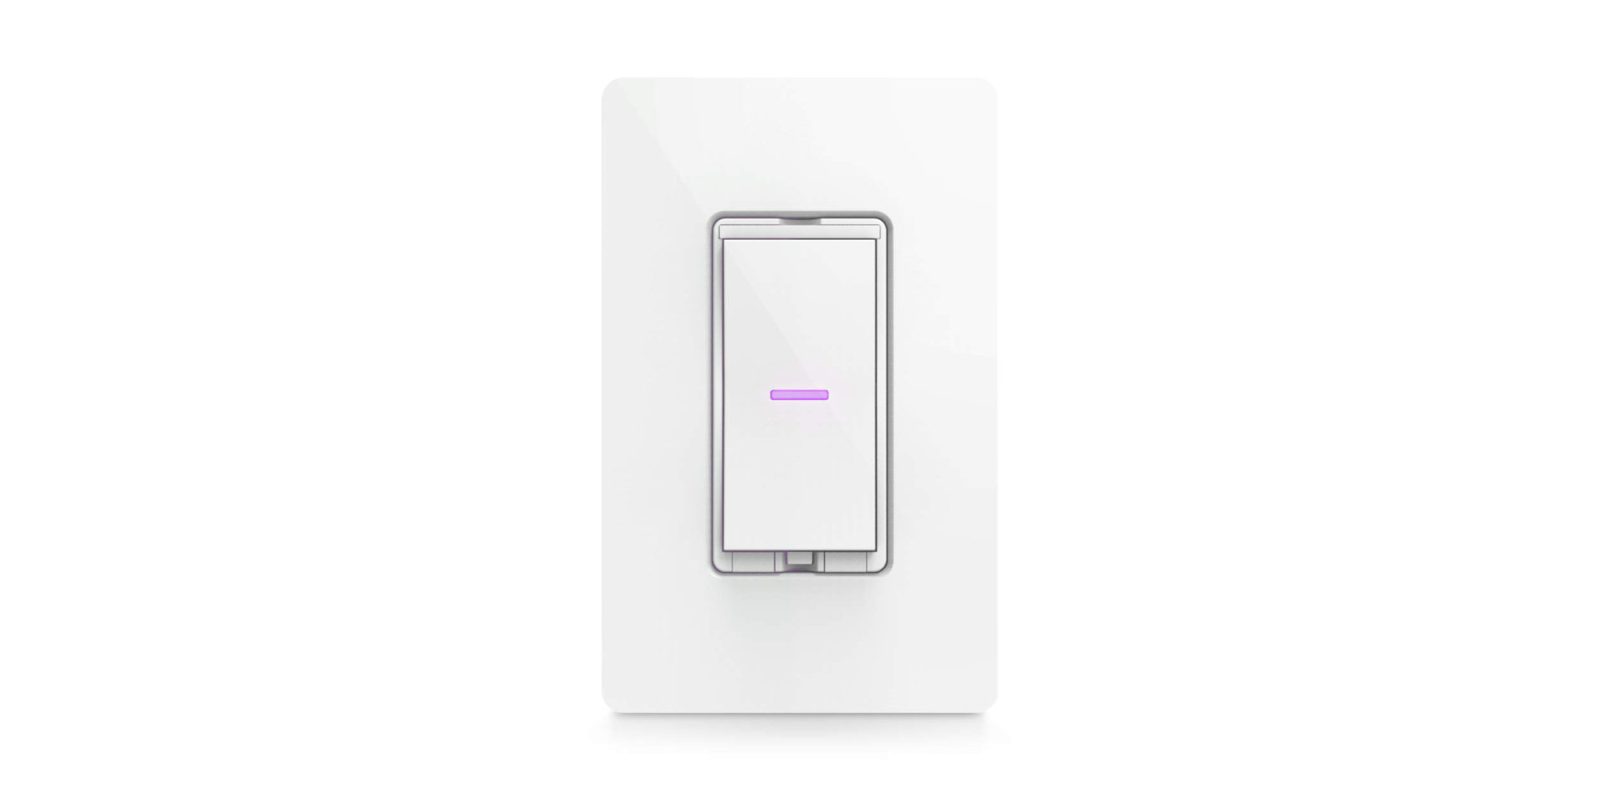 Idevice S Homekit Dimmer Switch Also Works With Alexa